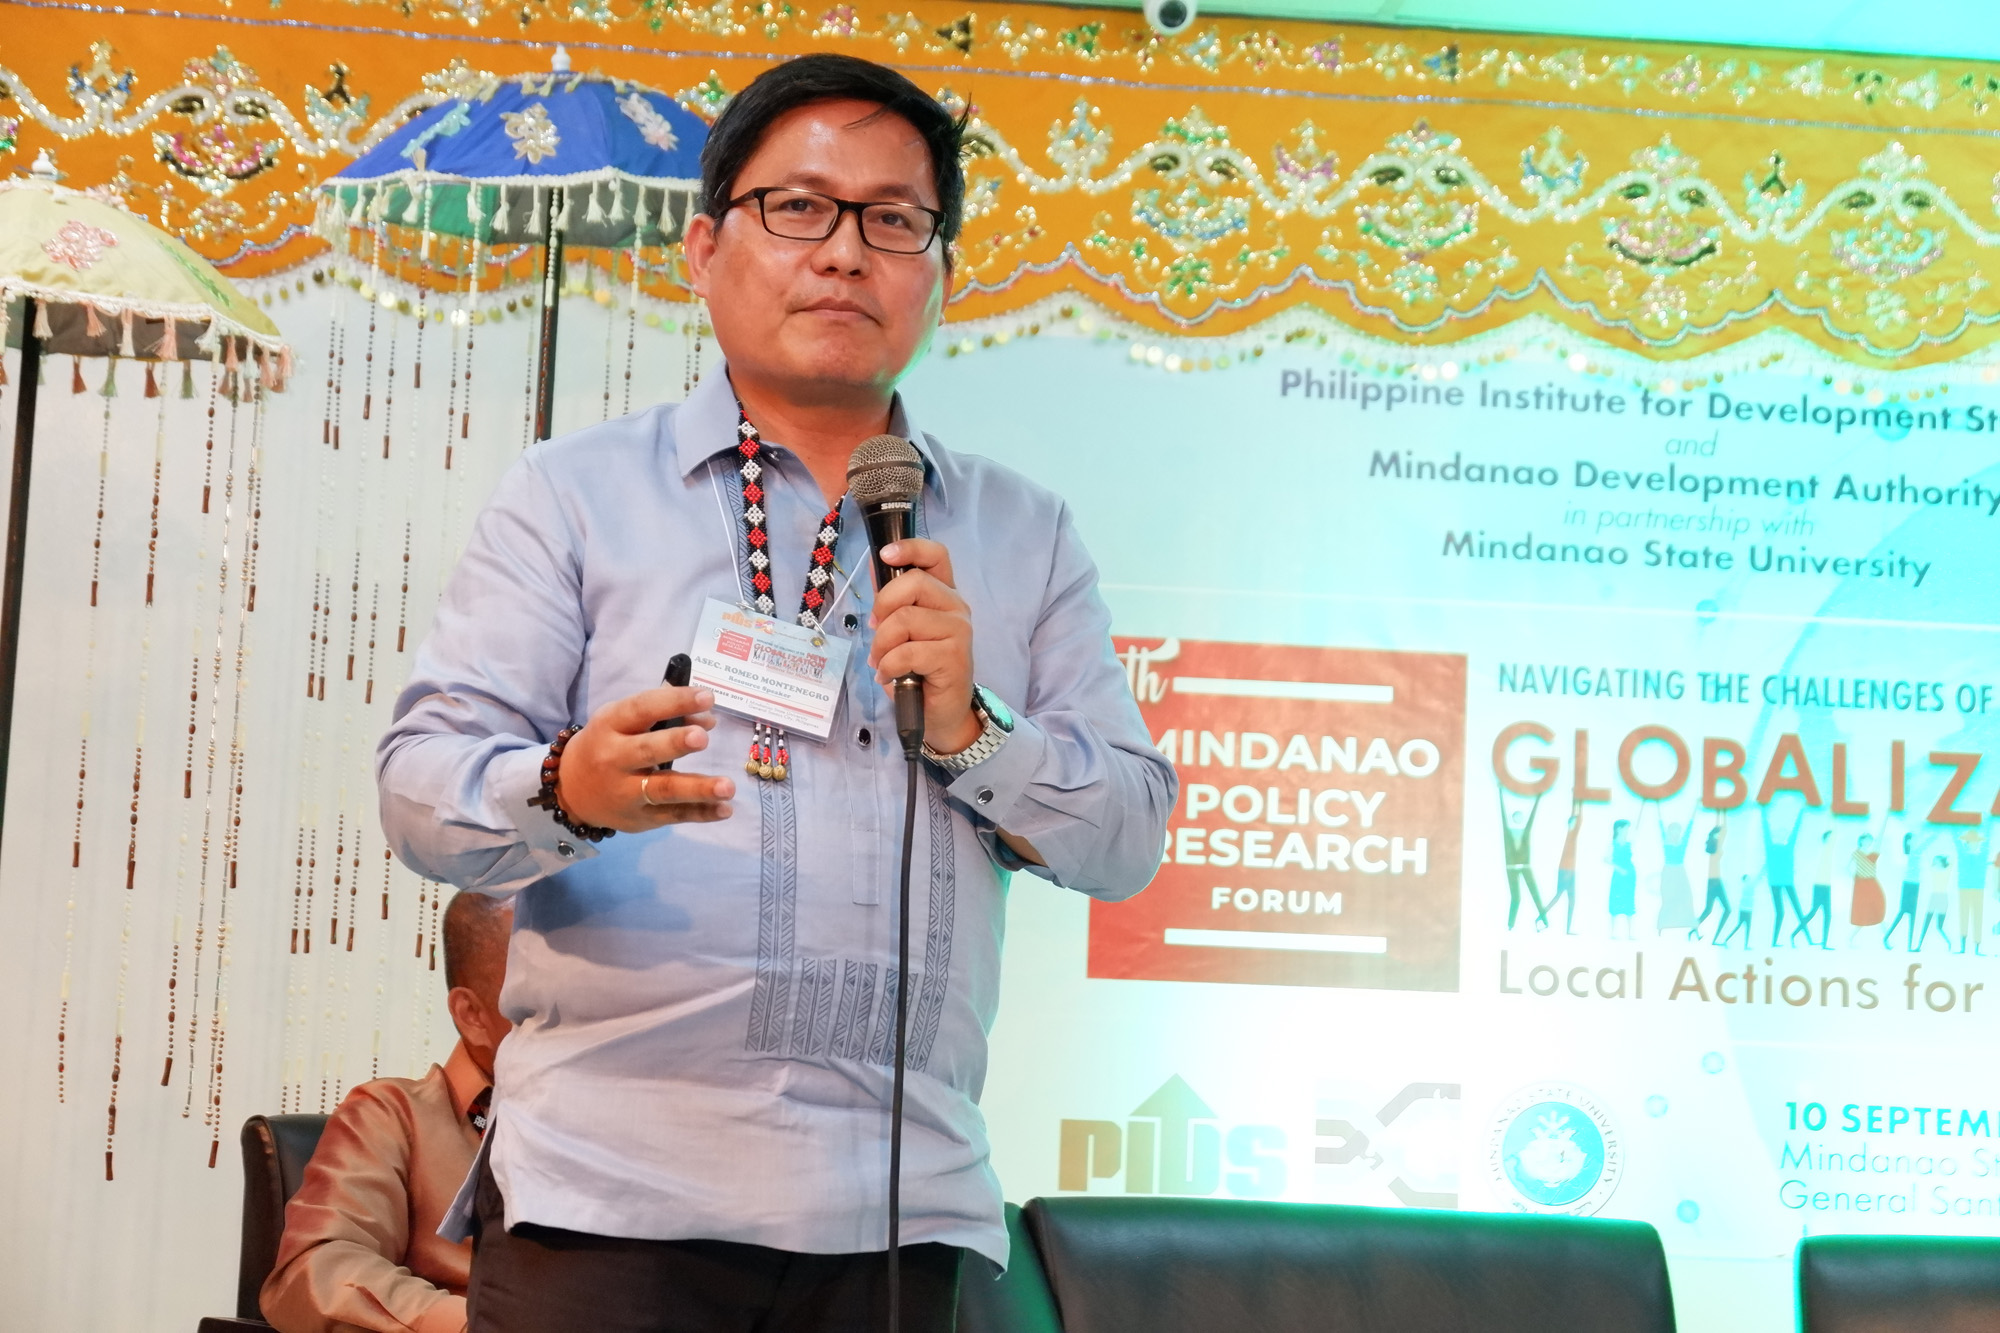 5th Mindanao Policy Research Forum: Navigating the Challenges of the New Globalization: Local Actions for Mindanao-mprf-35-20190925.jpg